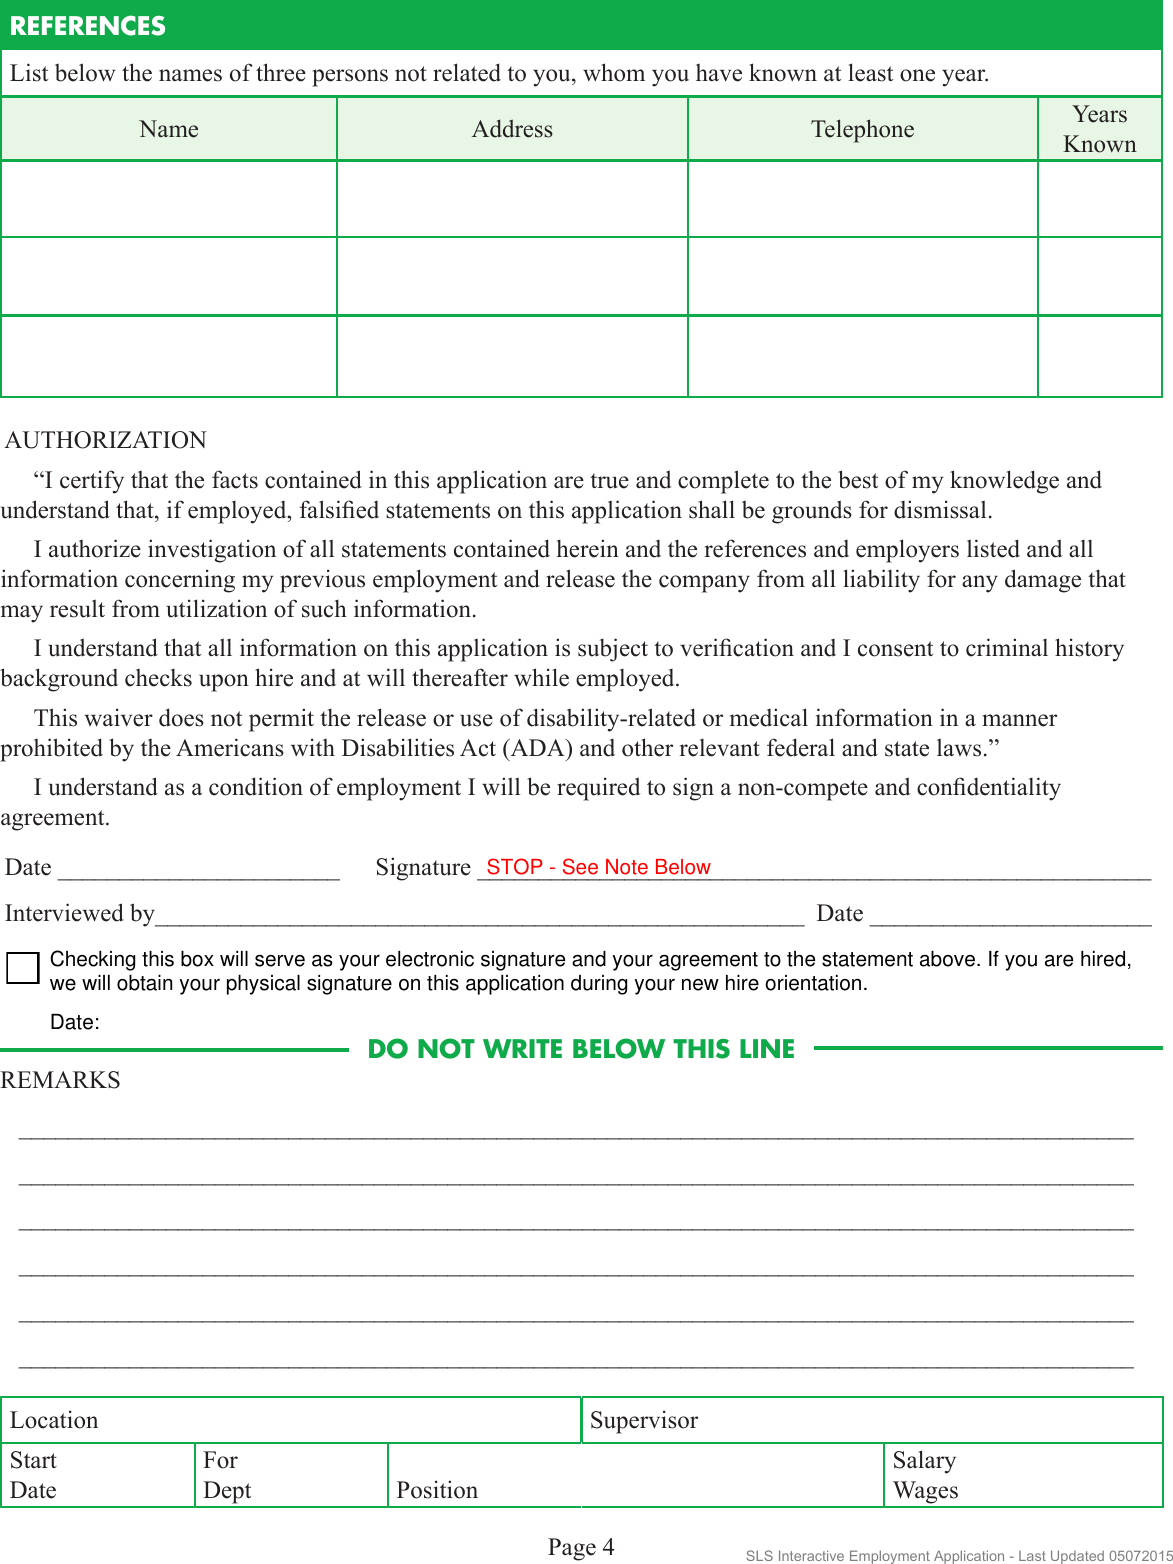 Page 4 of 4 - Sunlight Supply-Interactive-Employment-Application